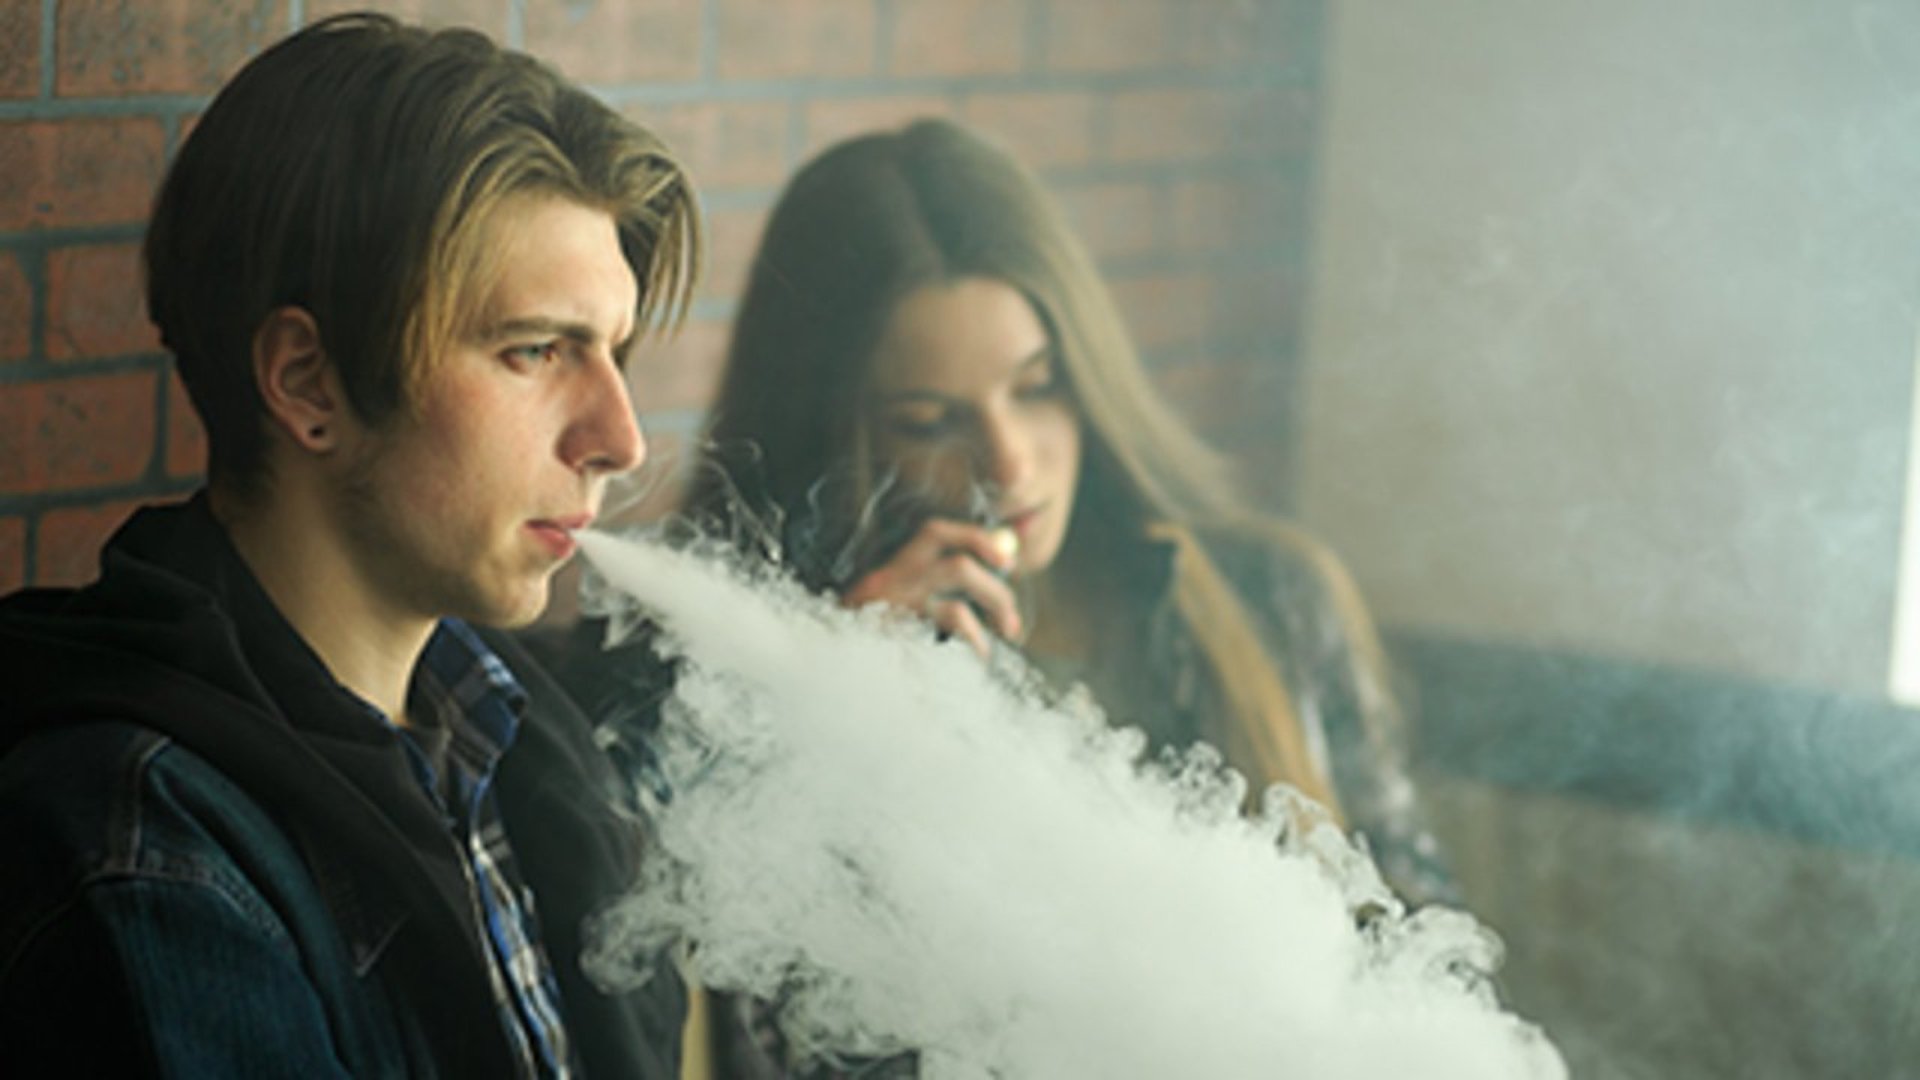 News Picture: For Over 1 in 10 Young U.S. Adults, Vaping Is a Regular Habit